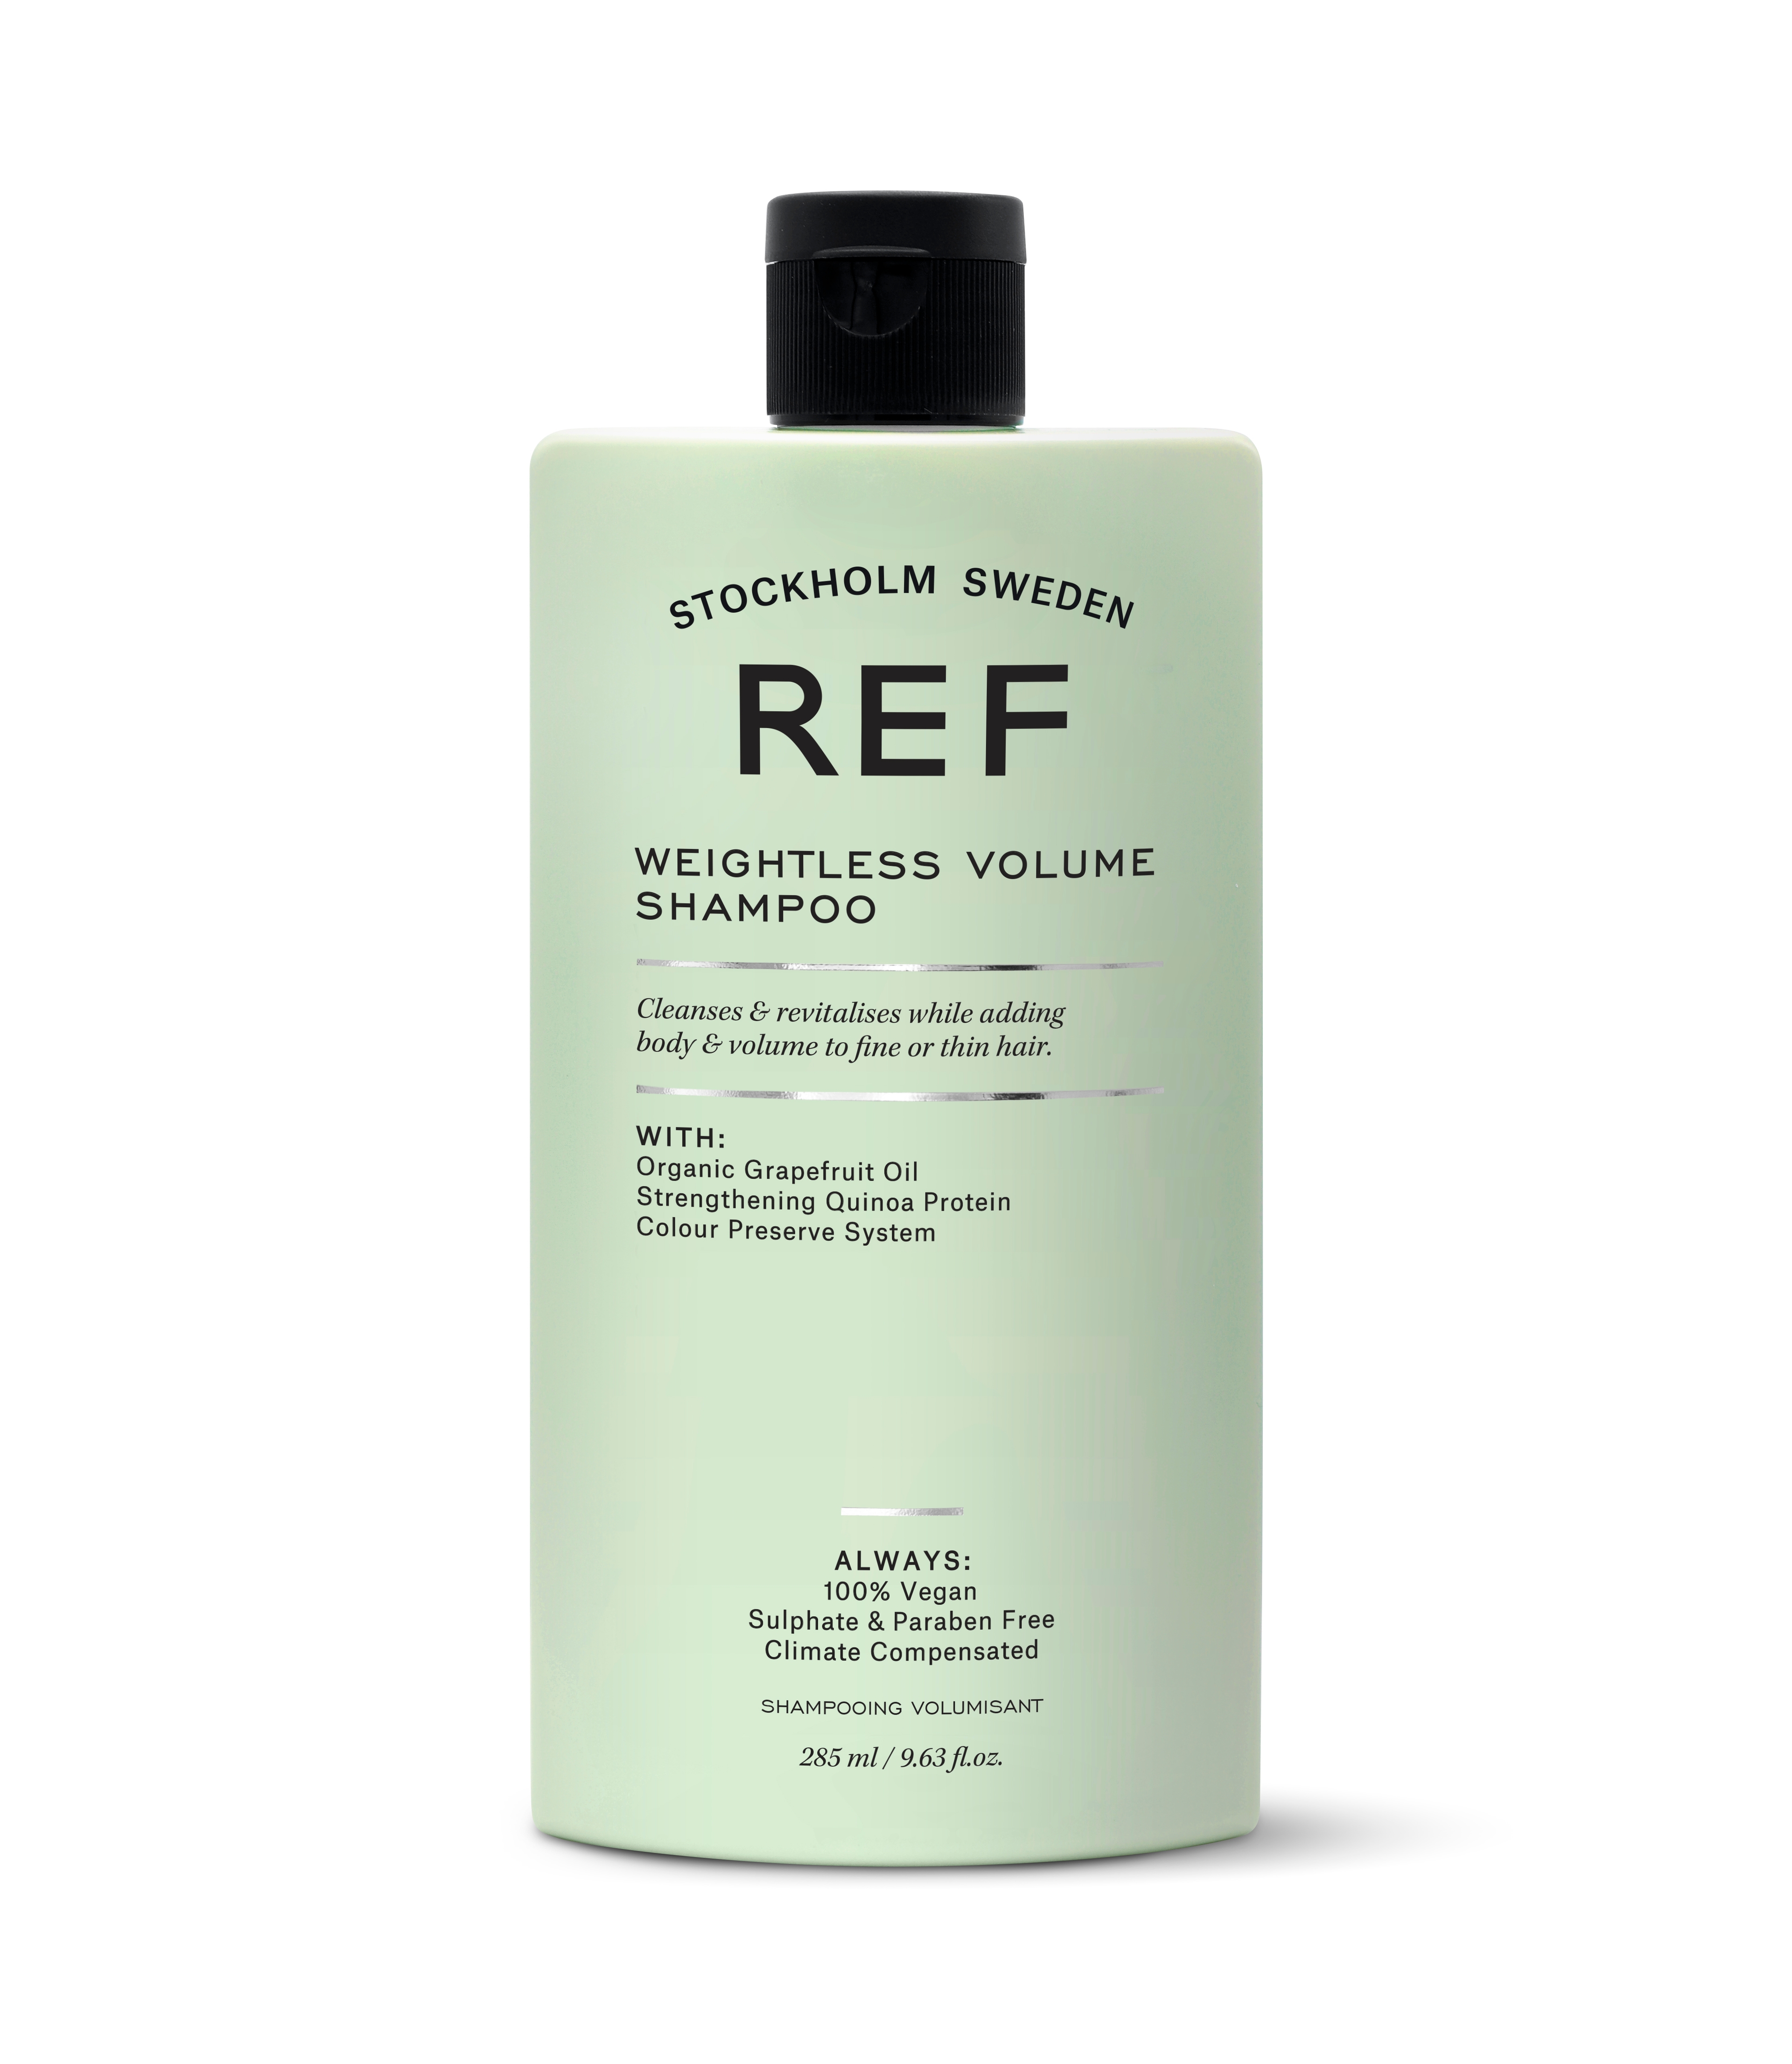 Product image from REF Shampoo - Weightless Volume Shampoo